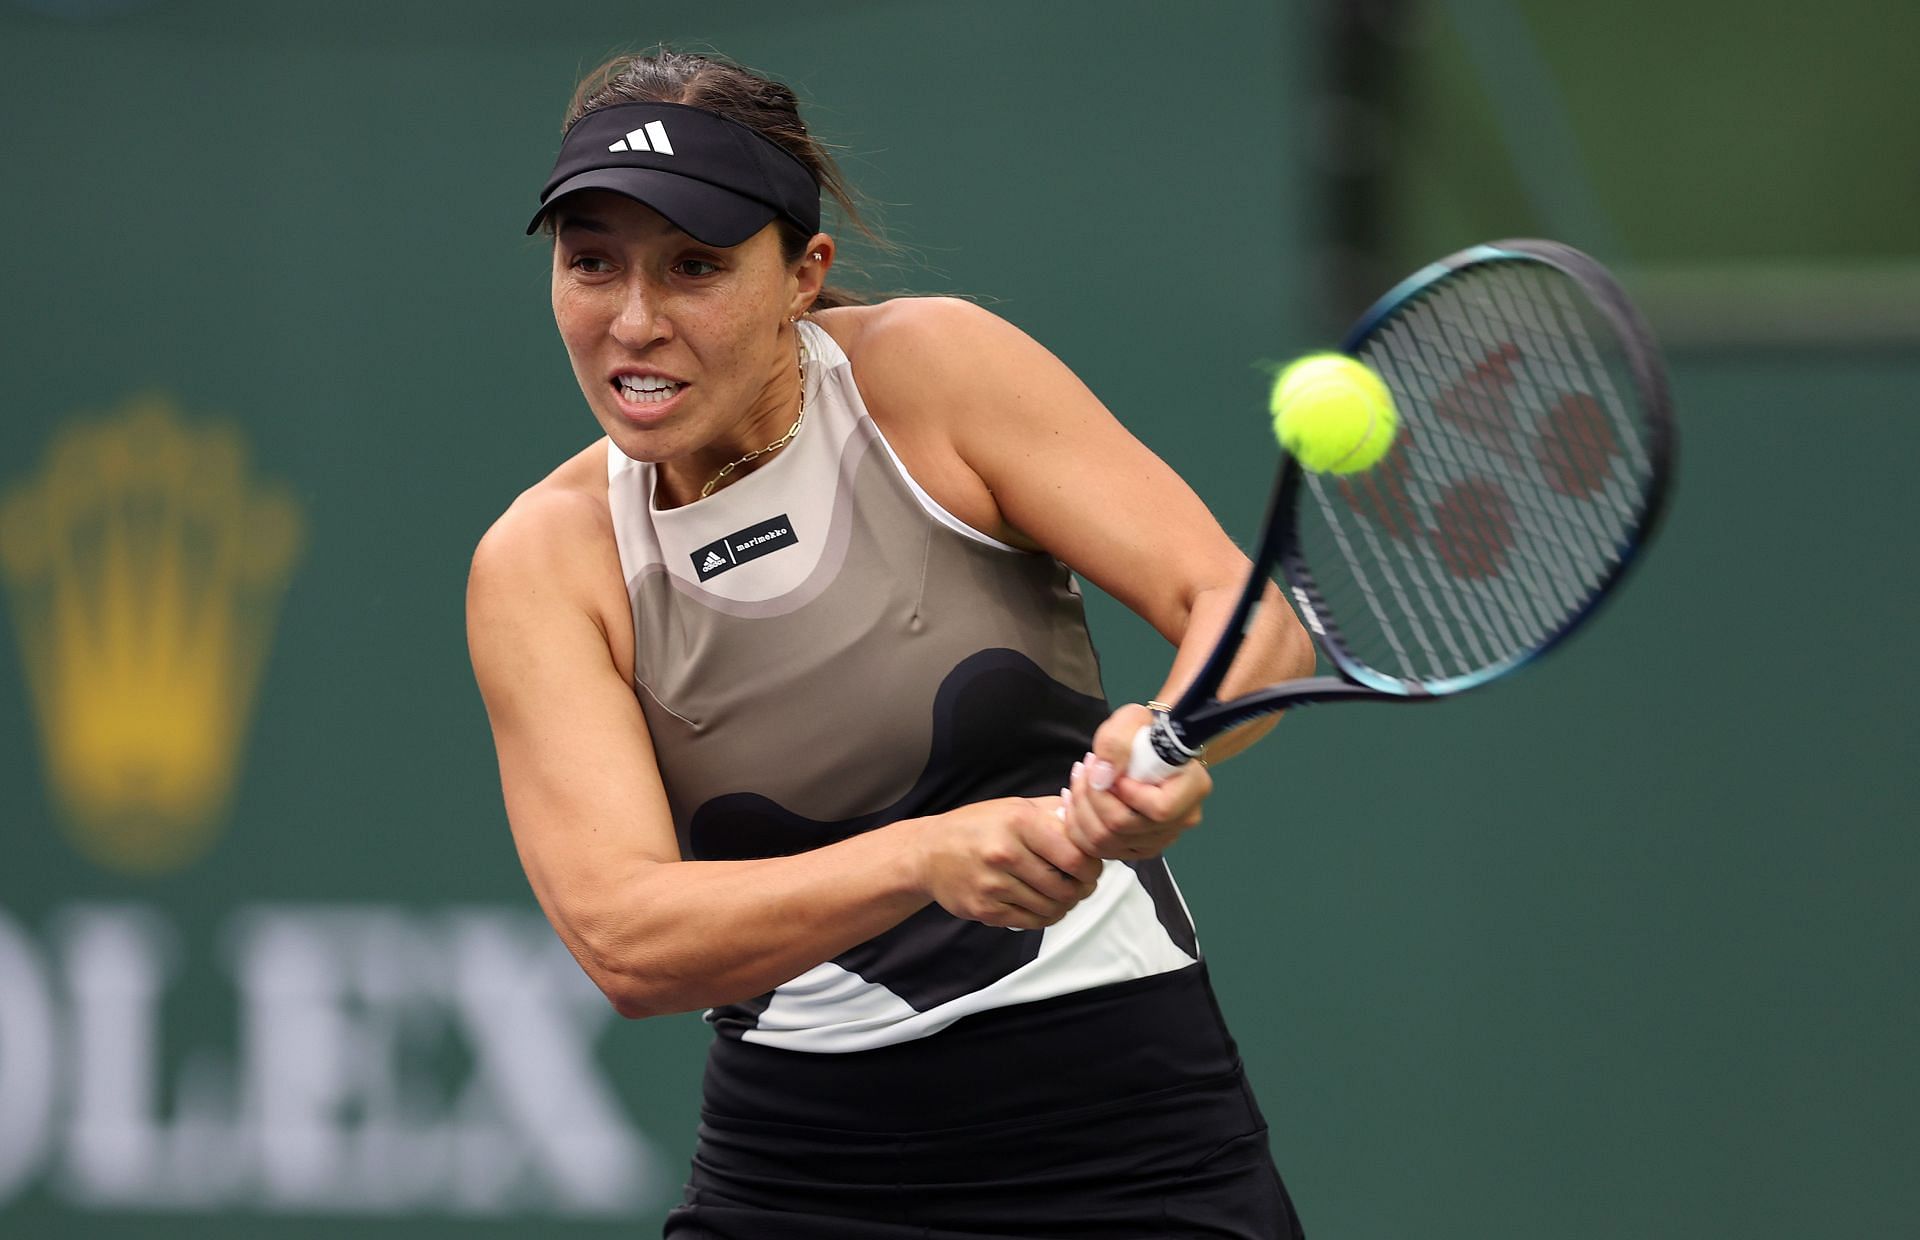 Jessica Pegula competes during Indian Wells 2023.